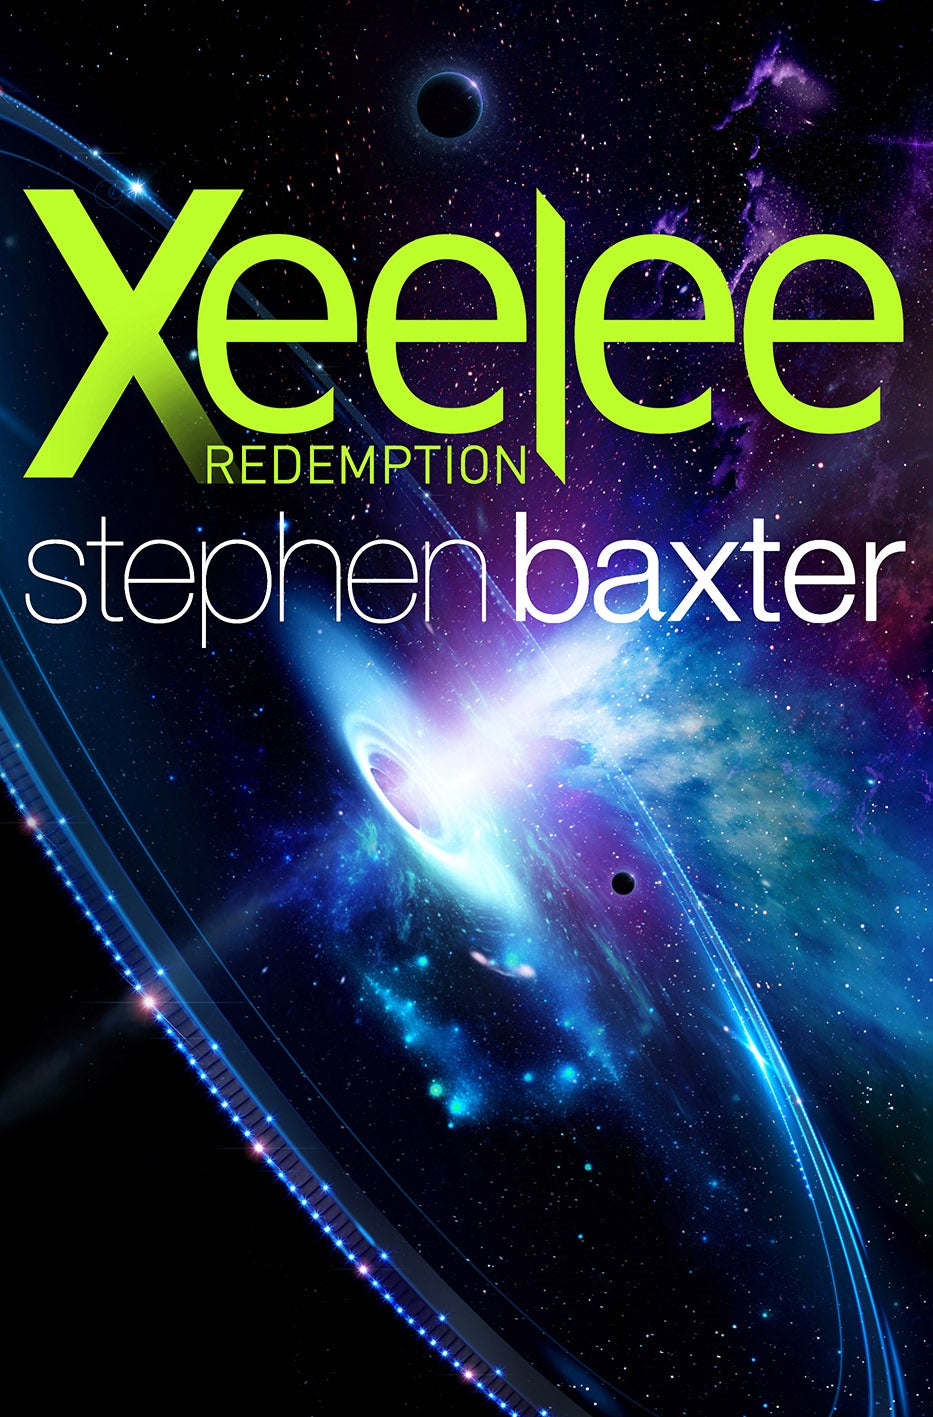 Xeelee: Redemption by Stephen Baxter